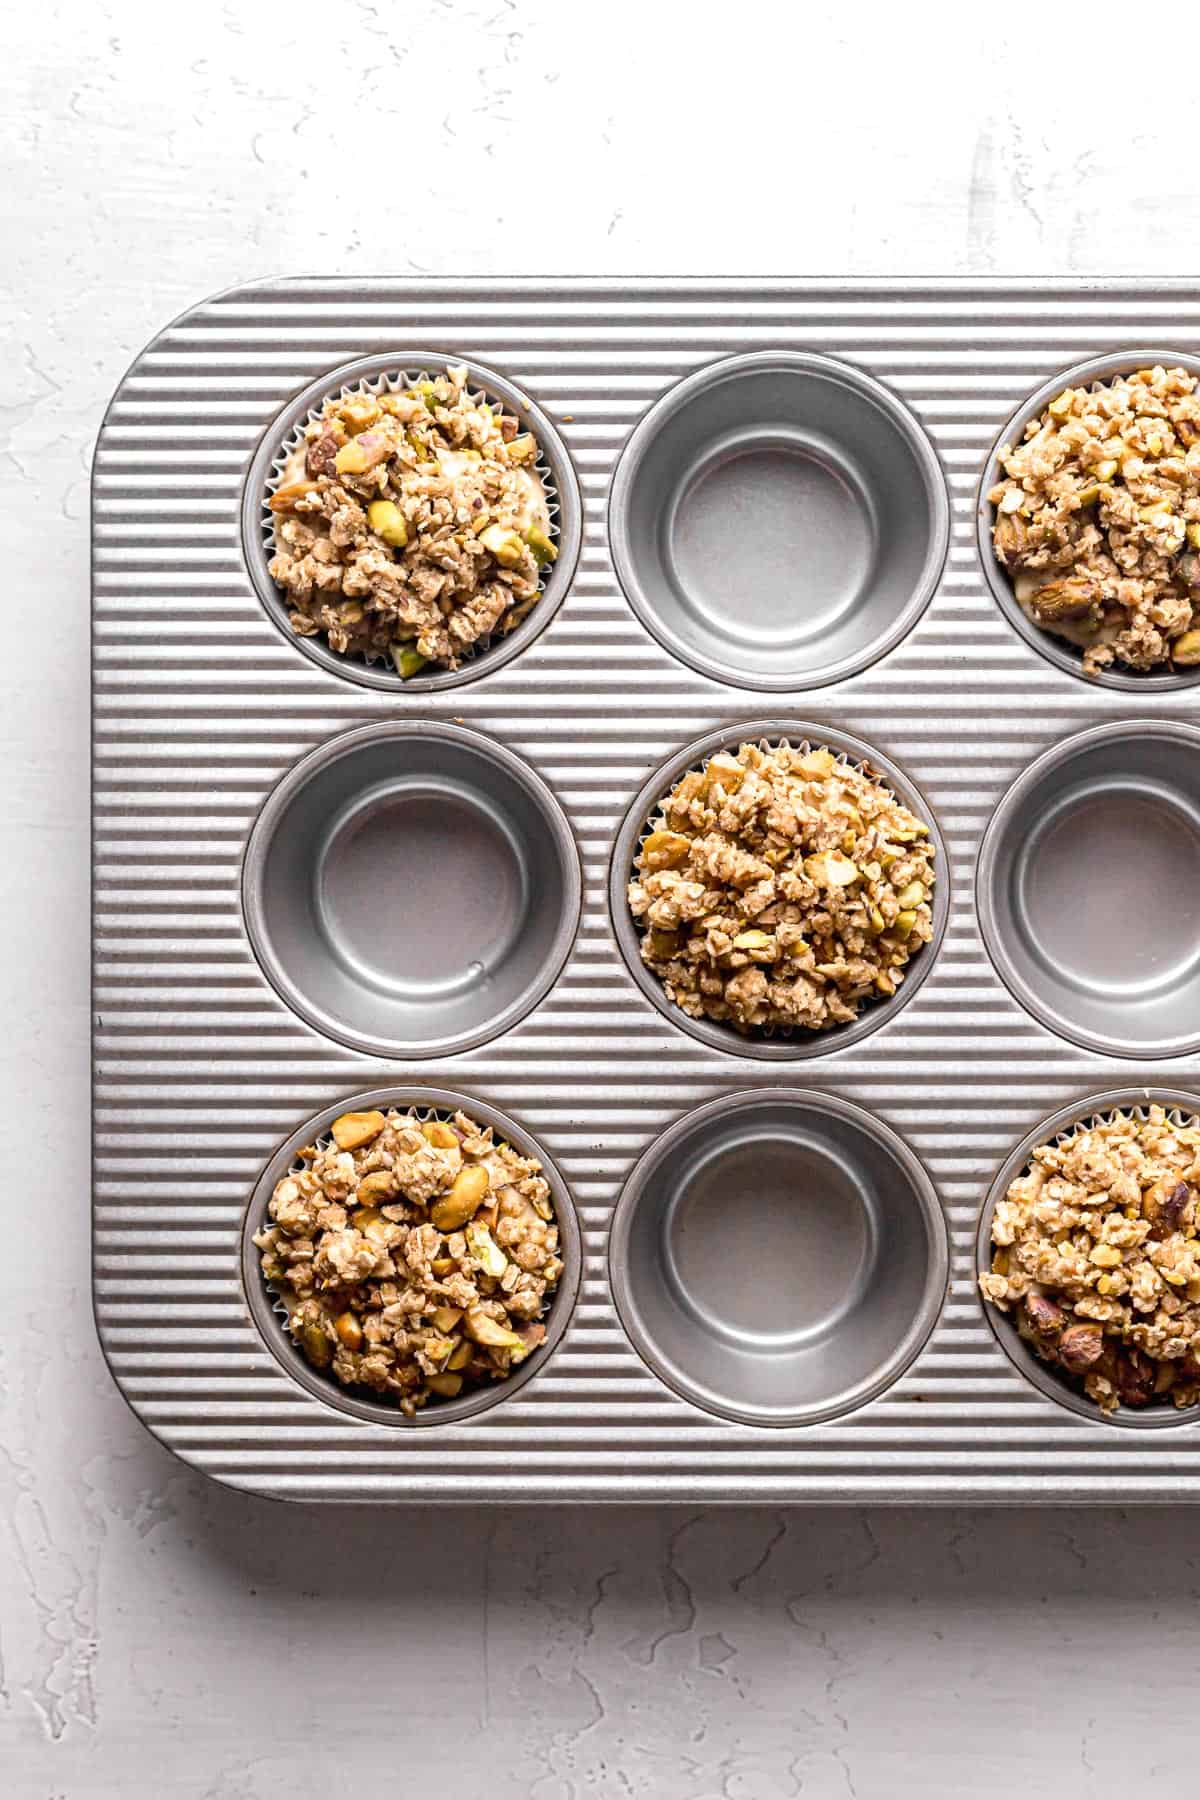 muffin batter with oat streusel on top in muffin pan.